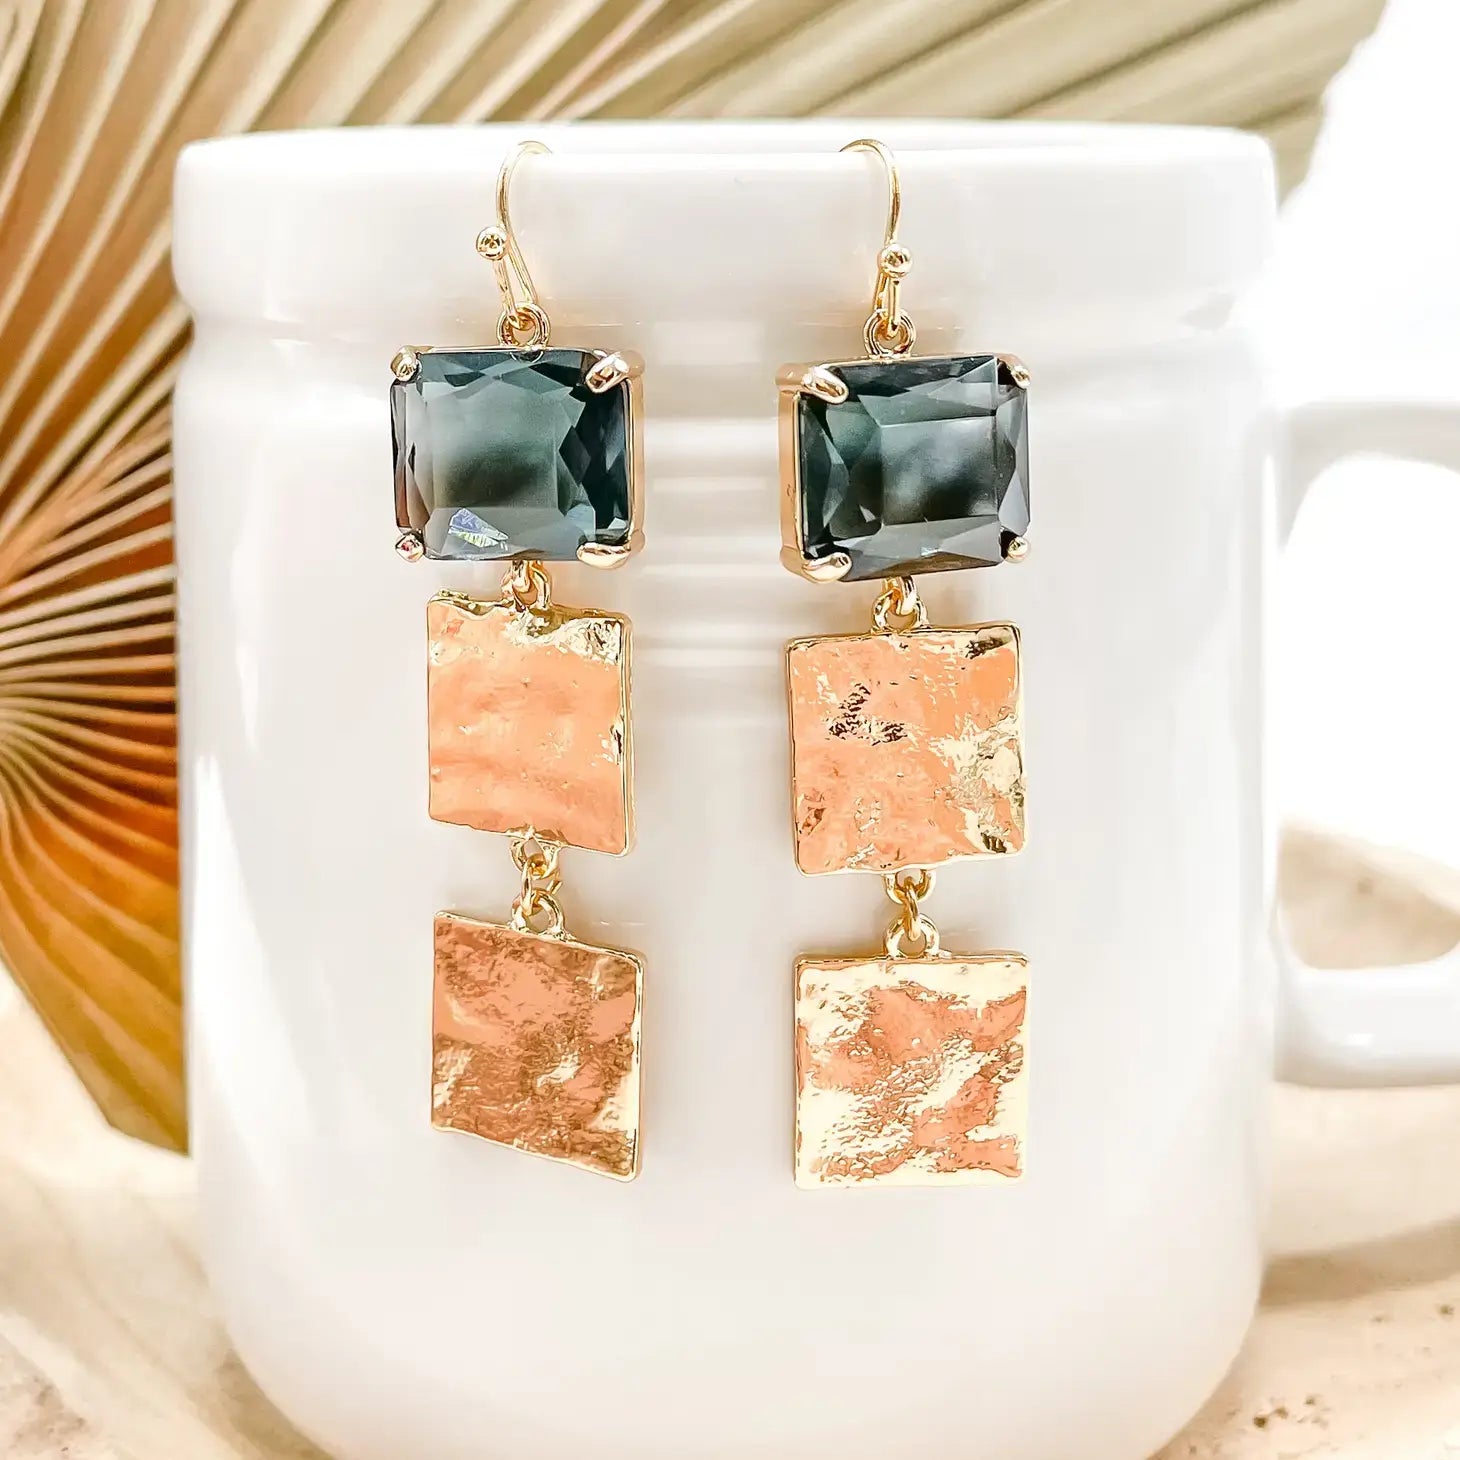 Decker Earrings by My Girl In LA are dangling style with a modern Black Gold finish. Earrings are also Sensitive Skin Friendly.